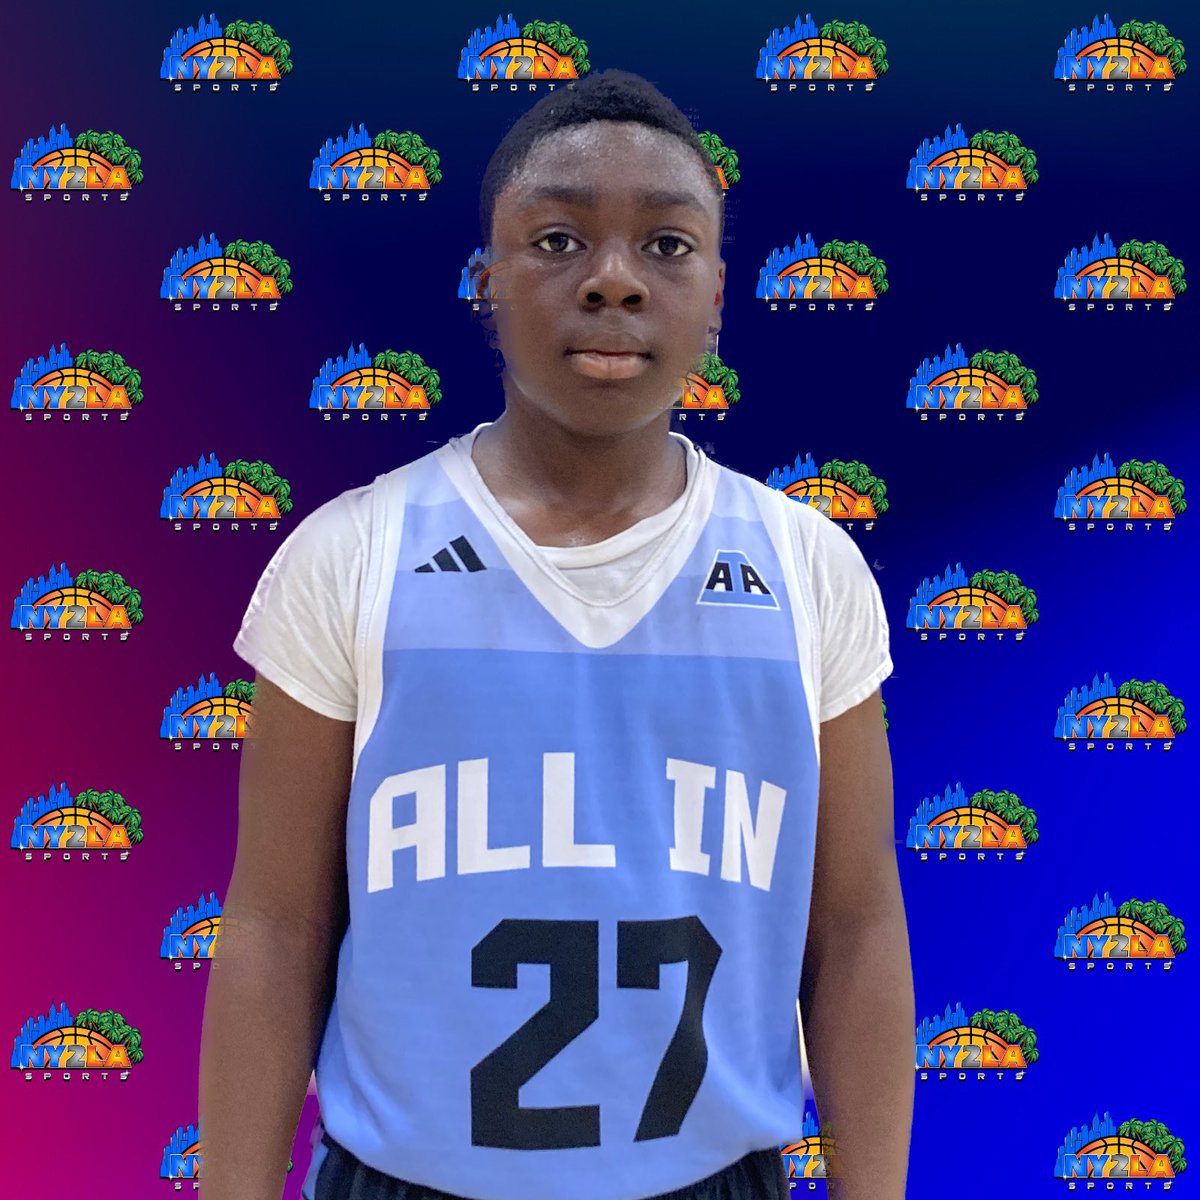 Eli Akuffo has been one of the more skilled guards at the 12U level today. Good moves and handle getting into the defense, shoots it well from the outside with the ability to create his own shot. Scored 33 pts in a win @AIAeliteboys @GNBABASKETBALL @ny2lasports